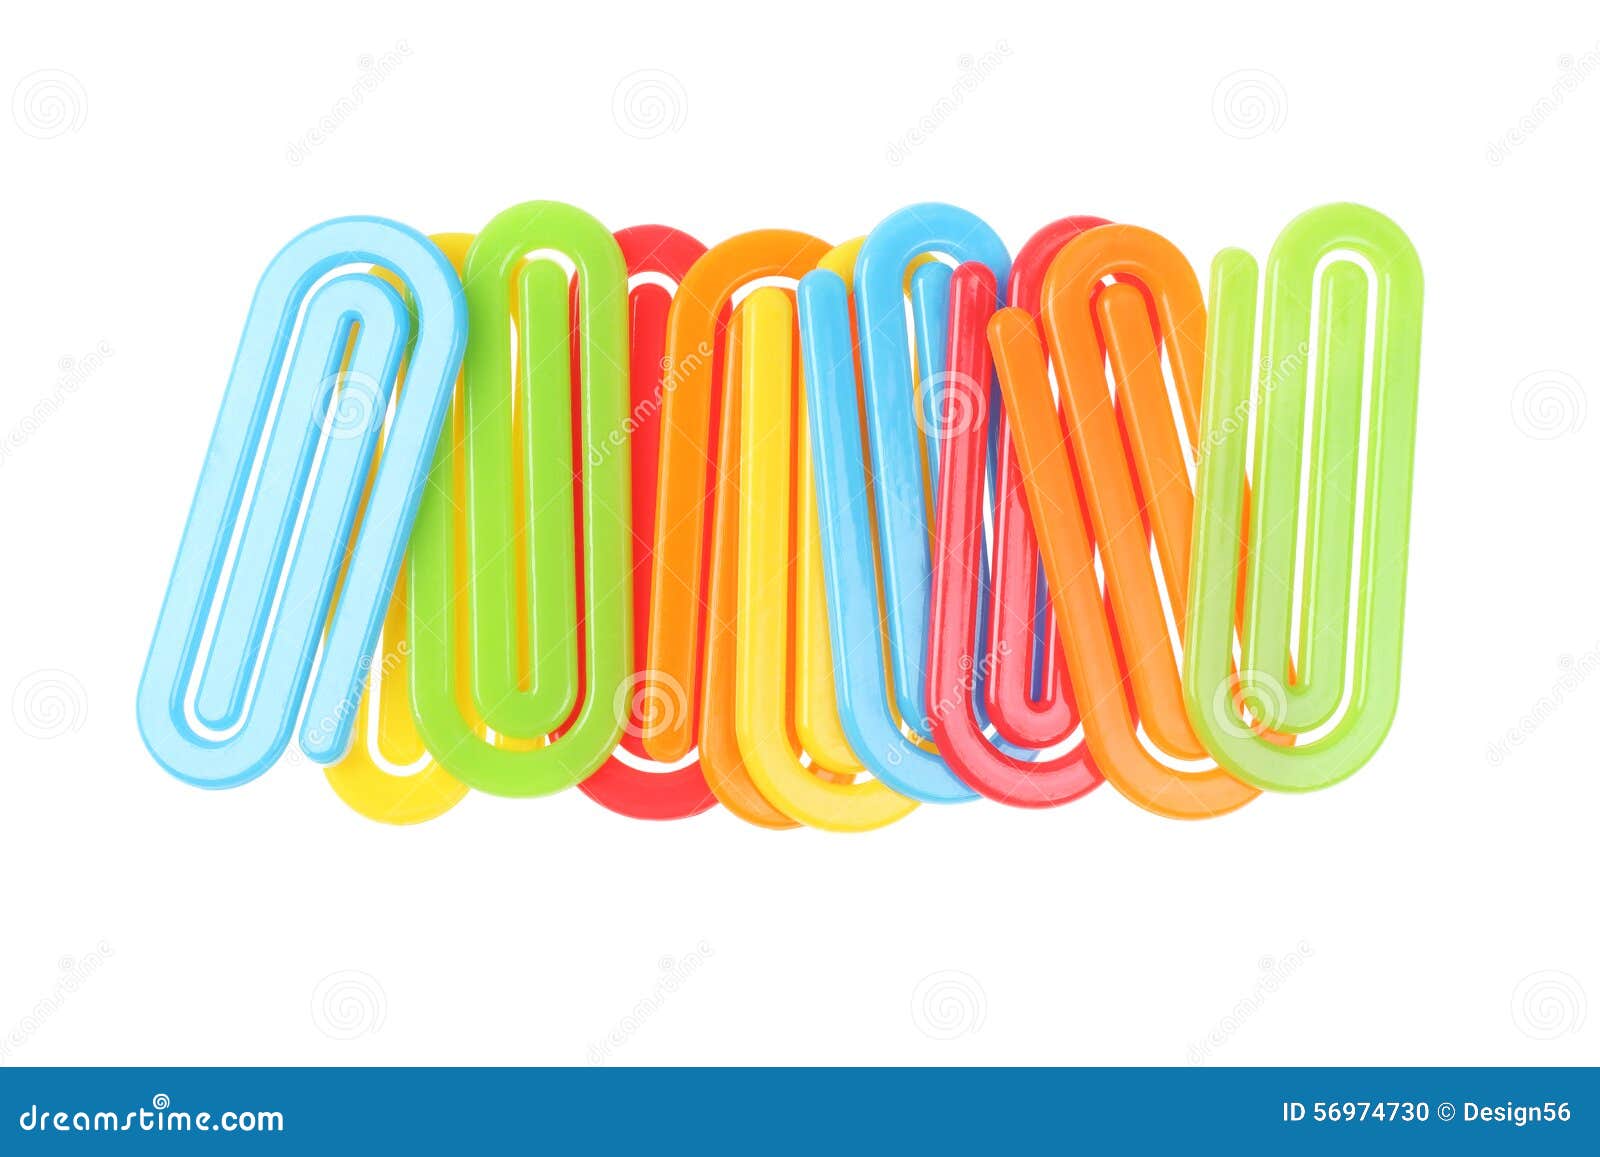 Plastic Paper Clips stock photo. Image of clip, shot - 56974730